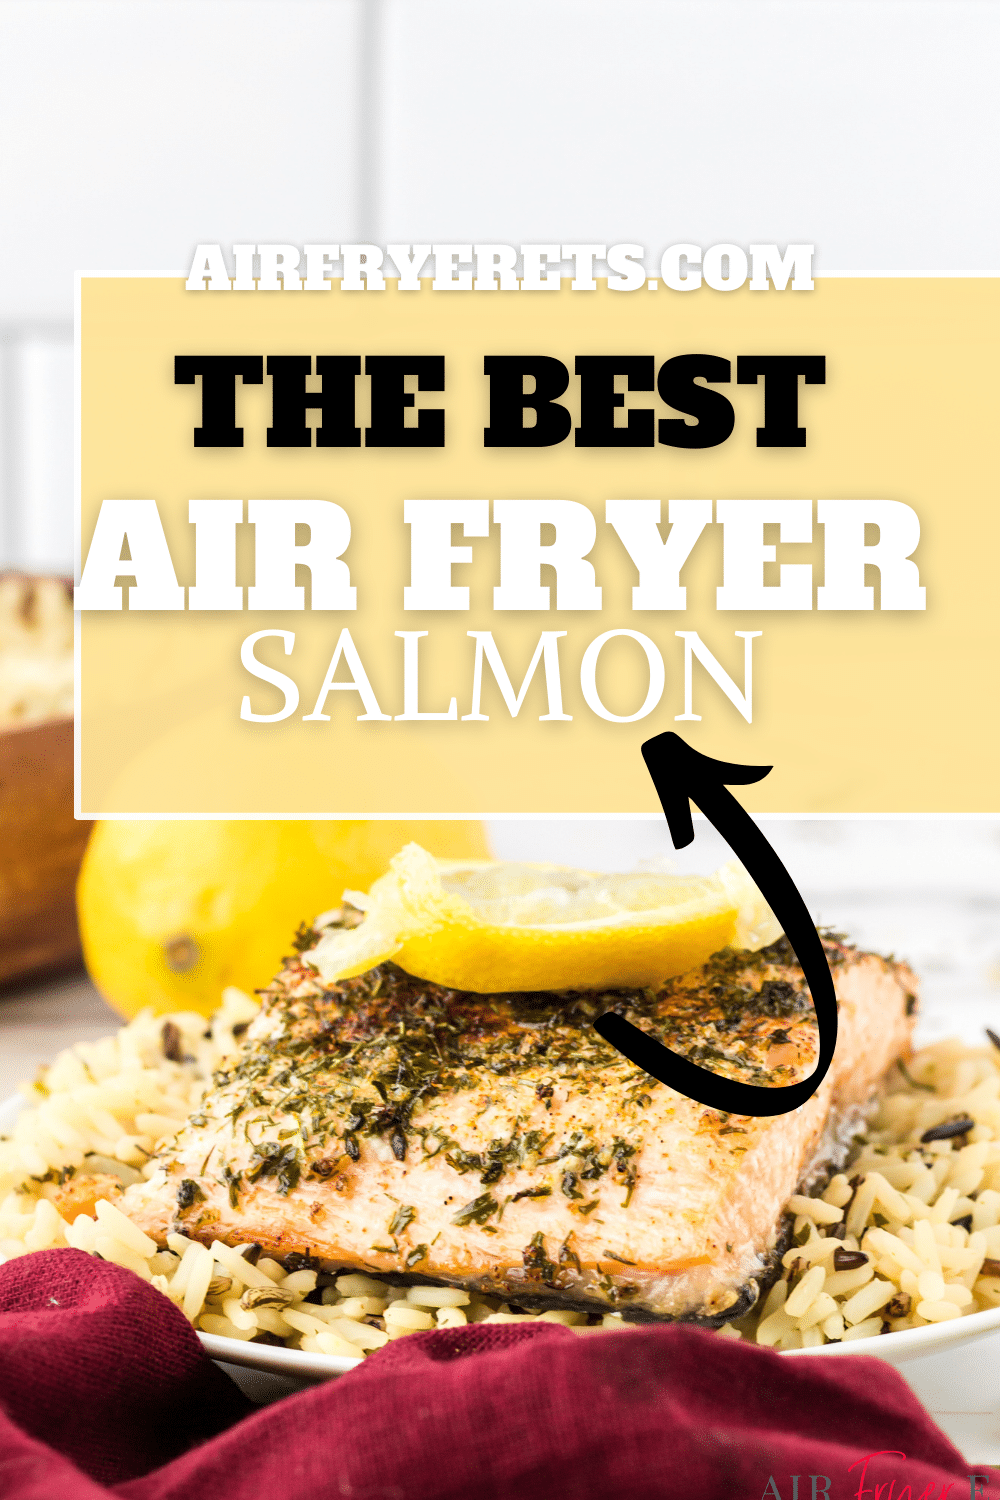 Complete with a savory, well-balanced seasoning blend and a spritz of fresh lemon juice, this Ninja Foodi Salmon recipe is the best around, ready in 10 minutes. #ninjafoodi #salmon via @vegetarianmamma